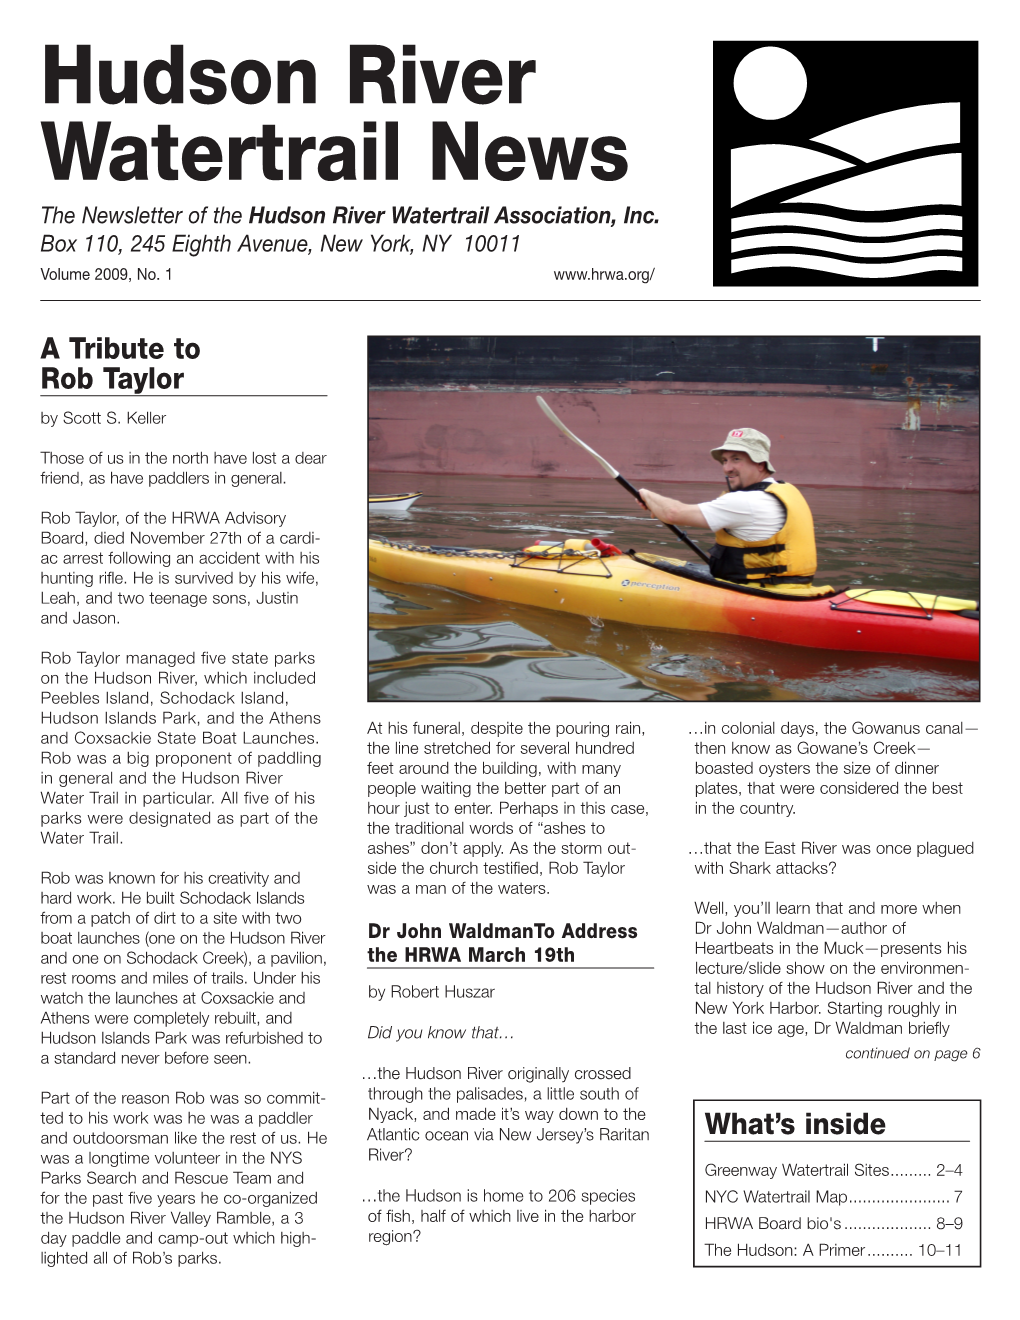 Hudson River Watertrail News the Newsletter of the Hudson River Watertrail Association, Inc